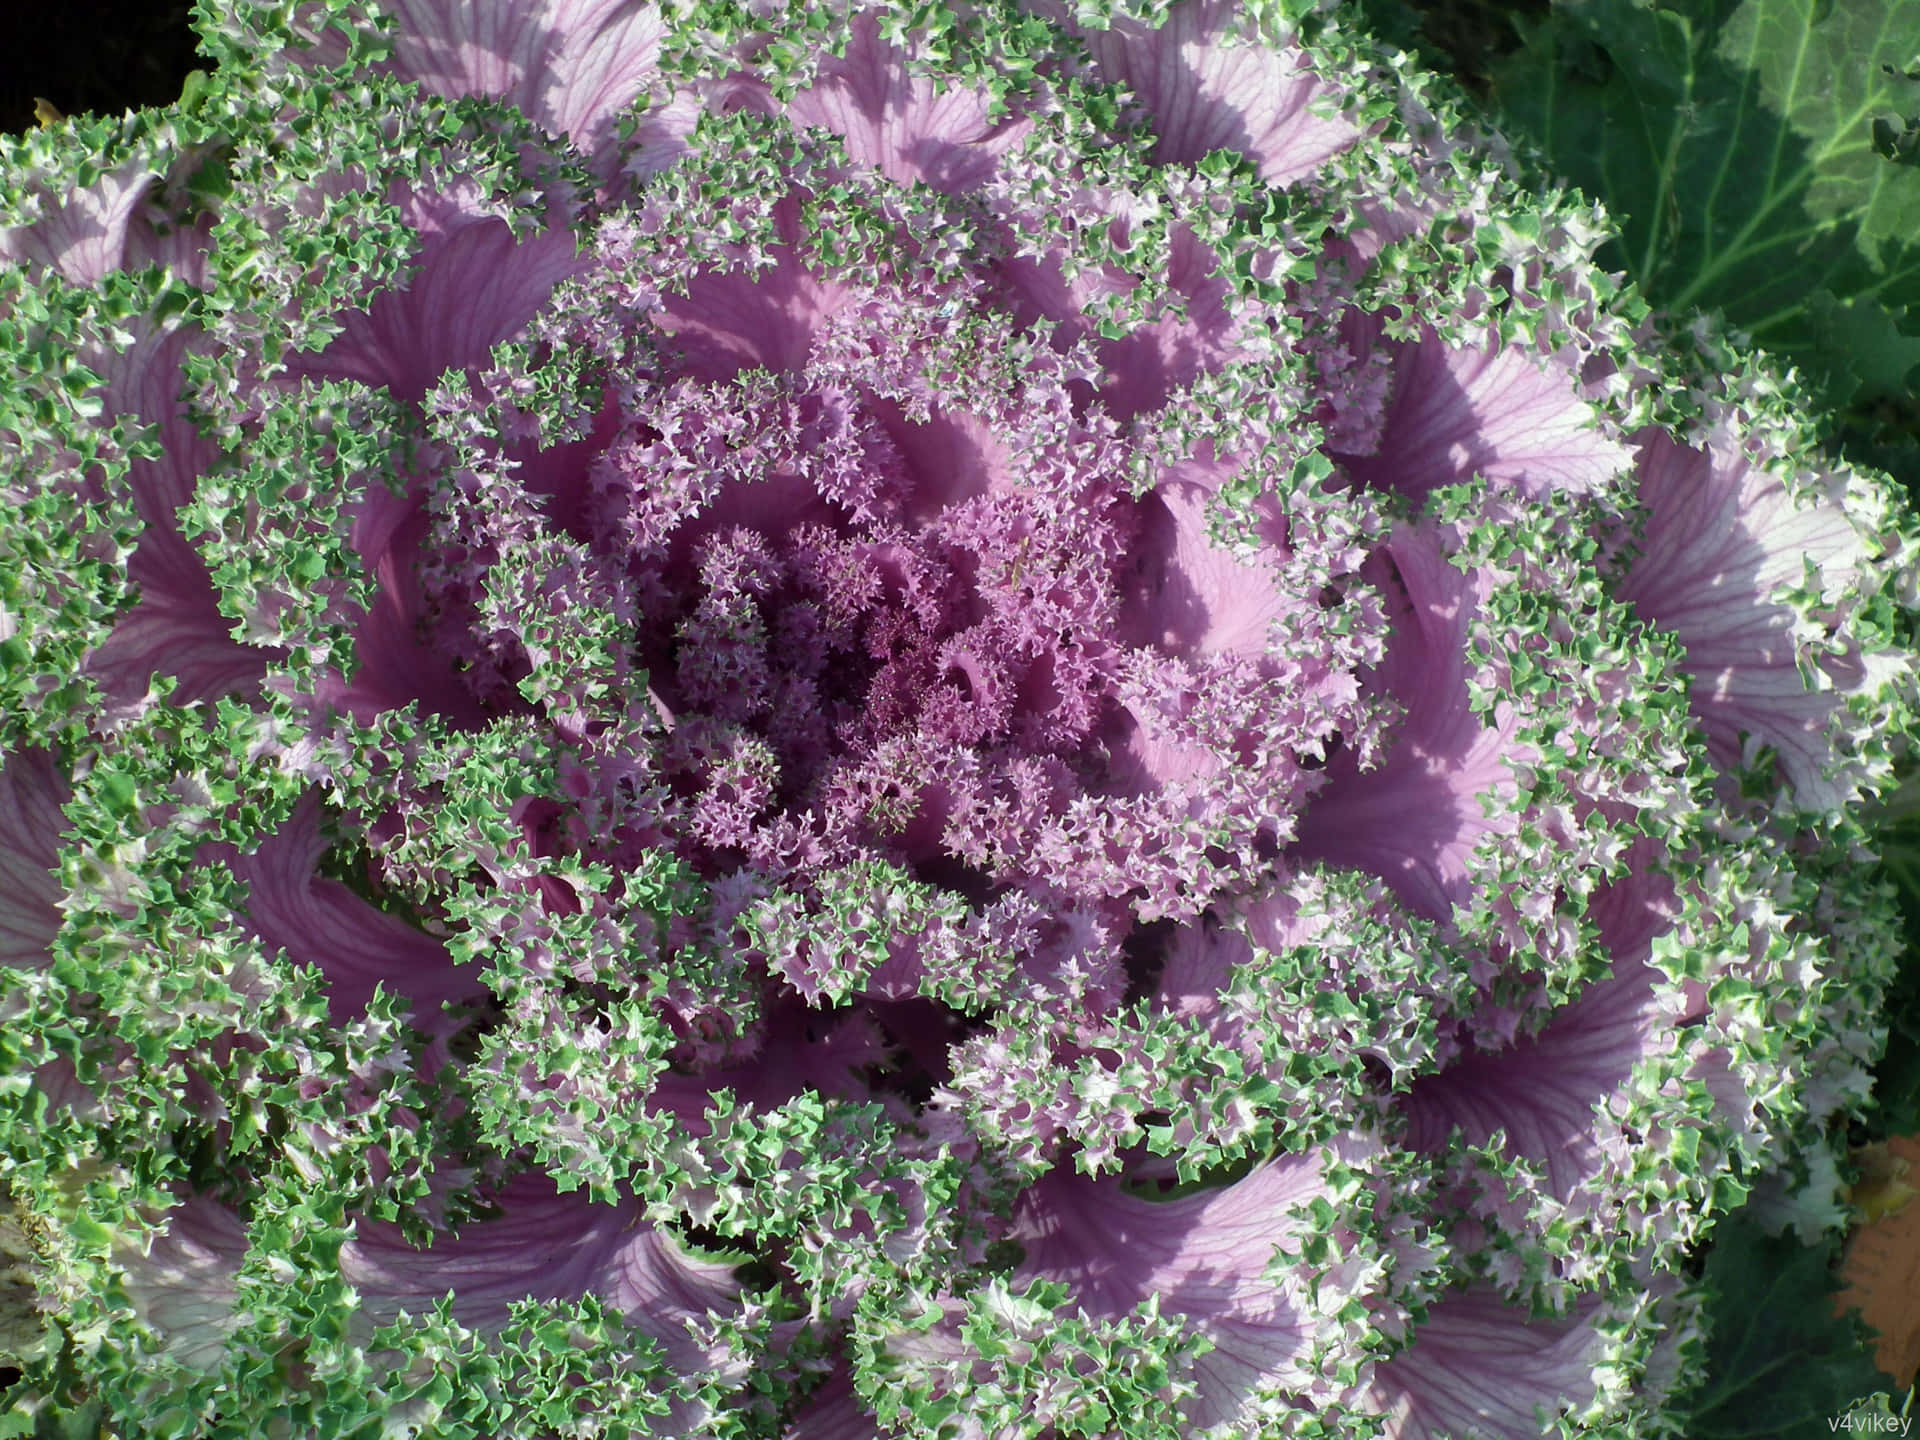 Revitalize yourself with purple kale! Wallpaper